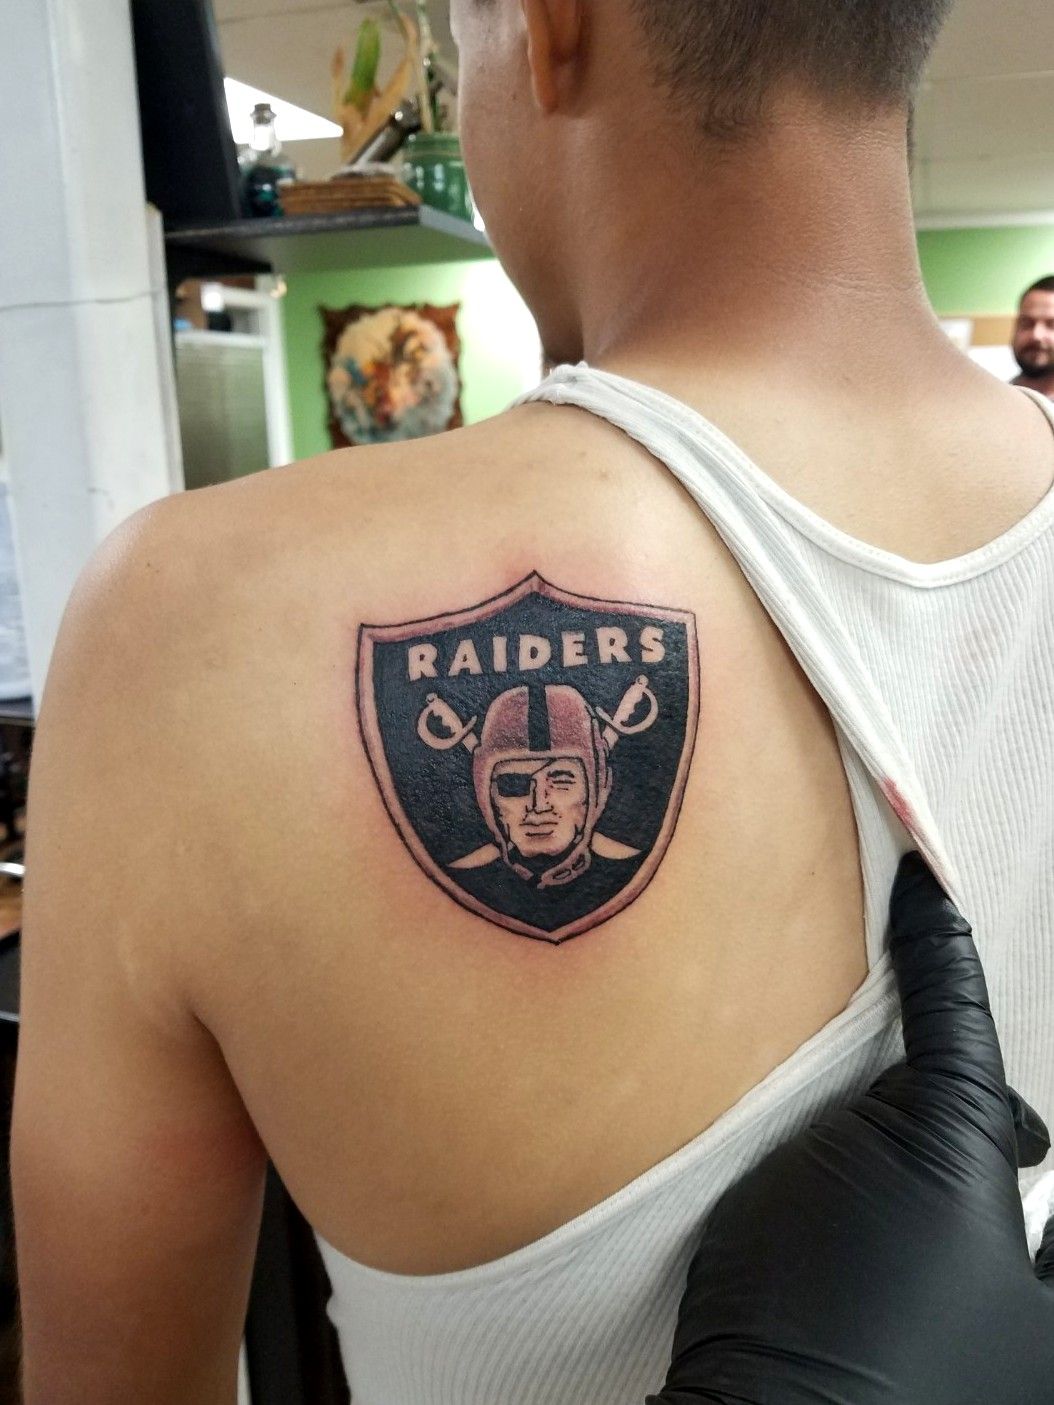 Last nights Raiders maga shield on the homie coco I love how this came out   thank you all that let me do me when it comes to the tattoo style my